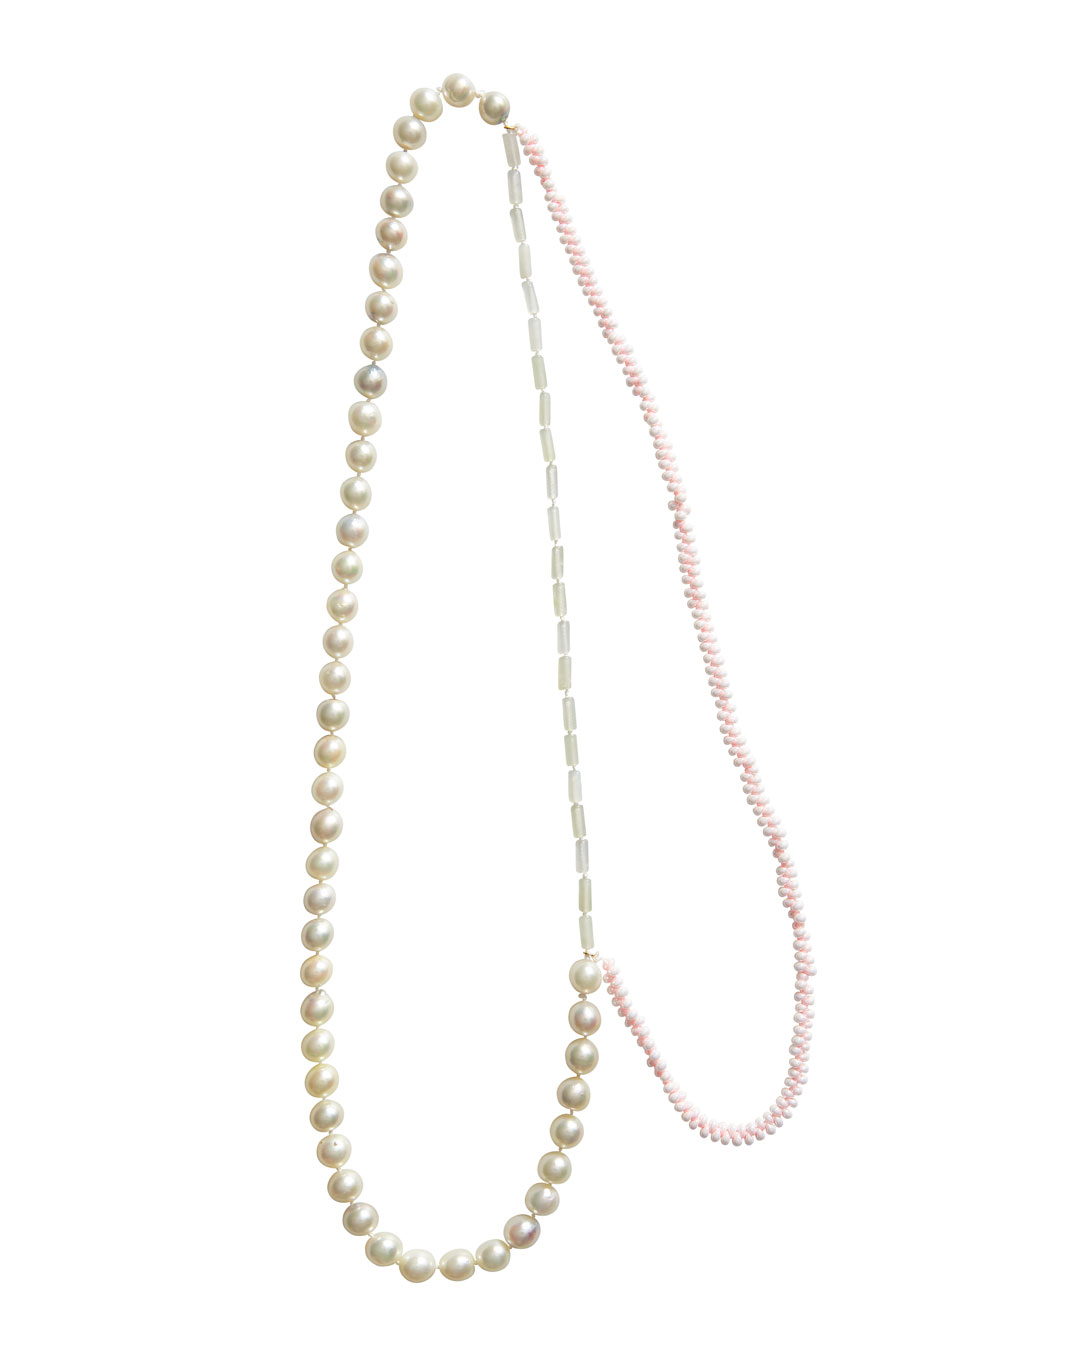 Annelies Planteijdt, Mooie stad - Roze water (Beautiful City - Pink Water), 2020, necklace; Akoya pearls, jade, Japanese glass beads, gold, yarn, 630 mm, €2725